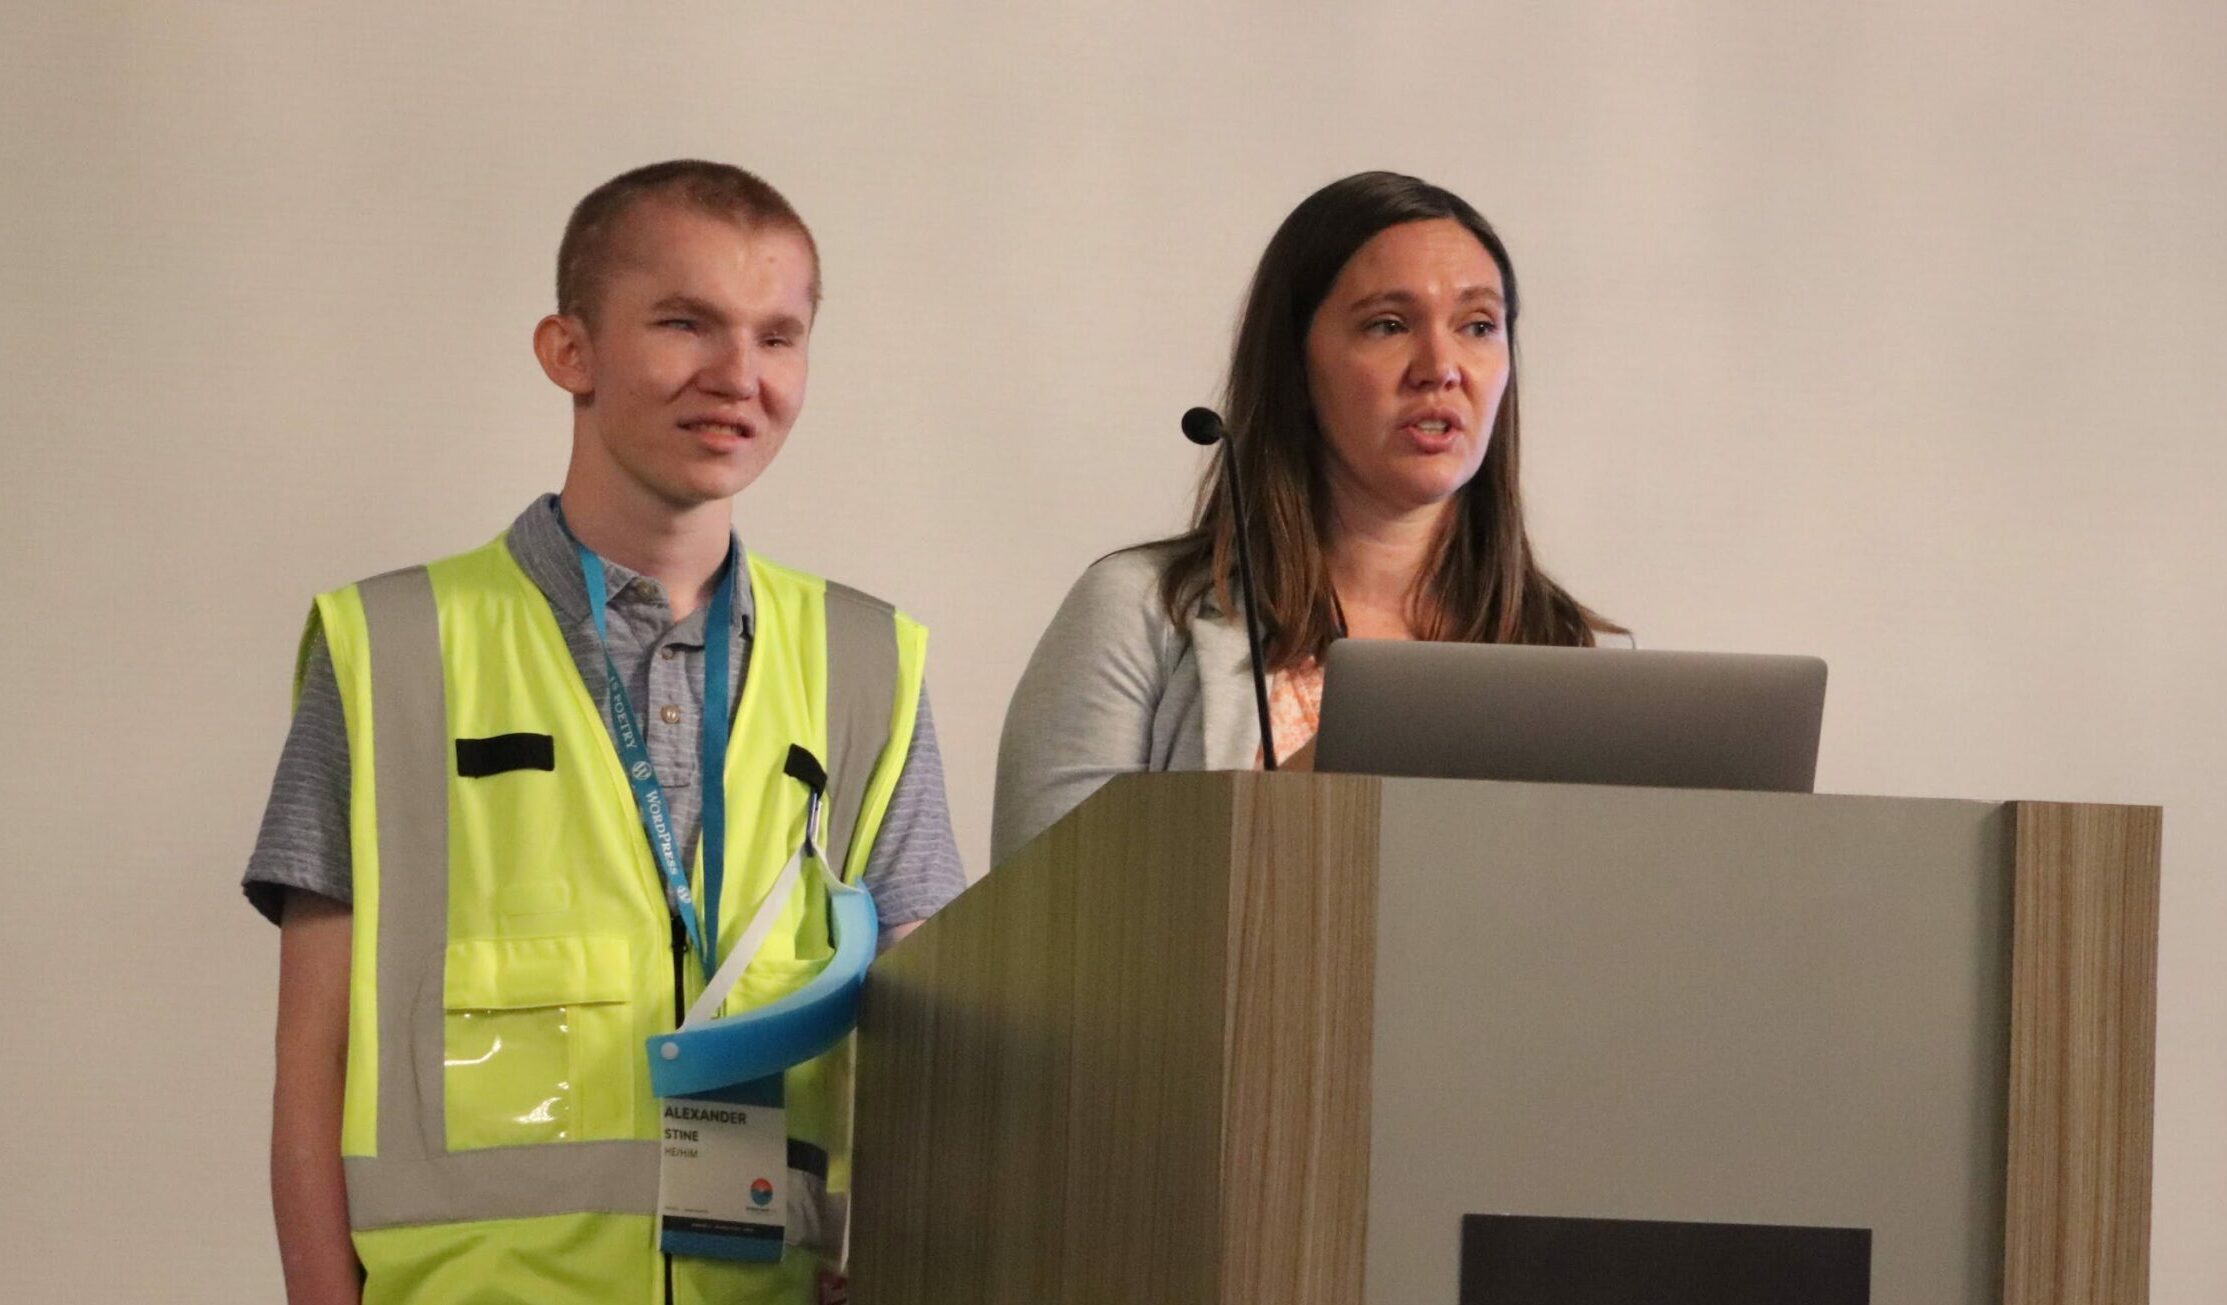 Alex Stine and Amber Hinds speak at the podium during WordCamp US 2022.